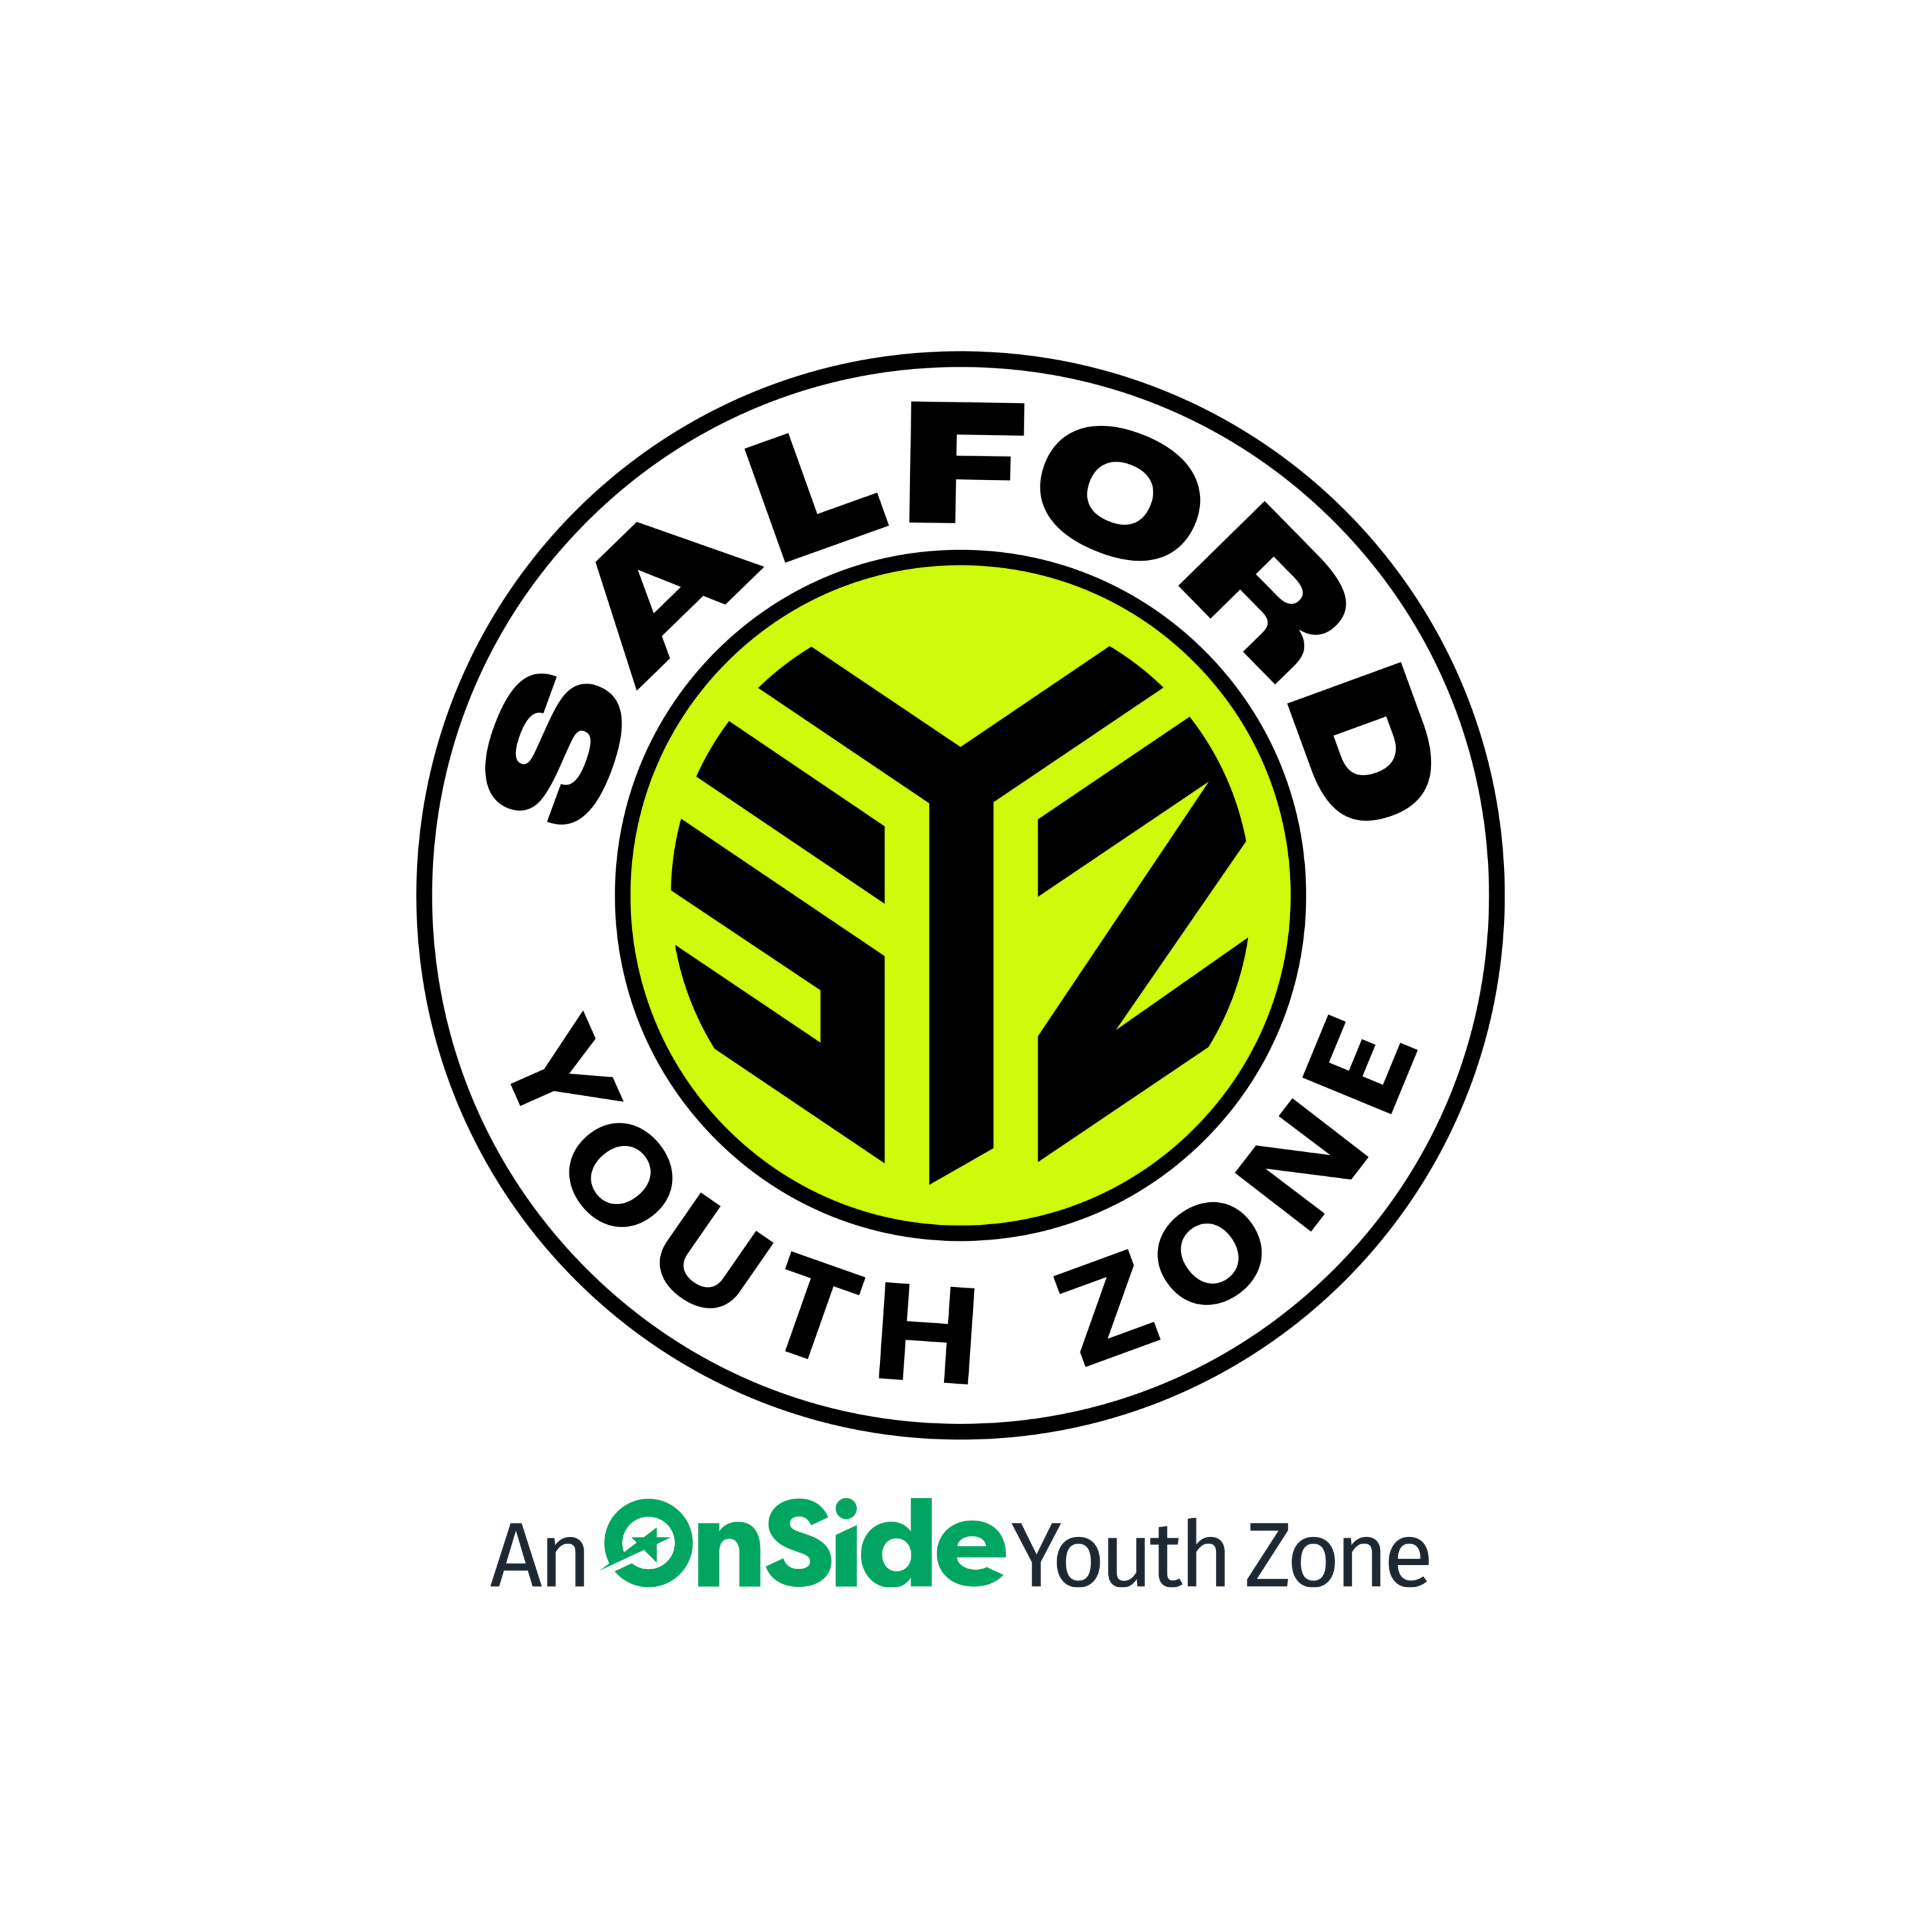 Salford youth zone